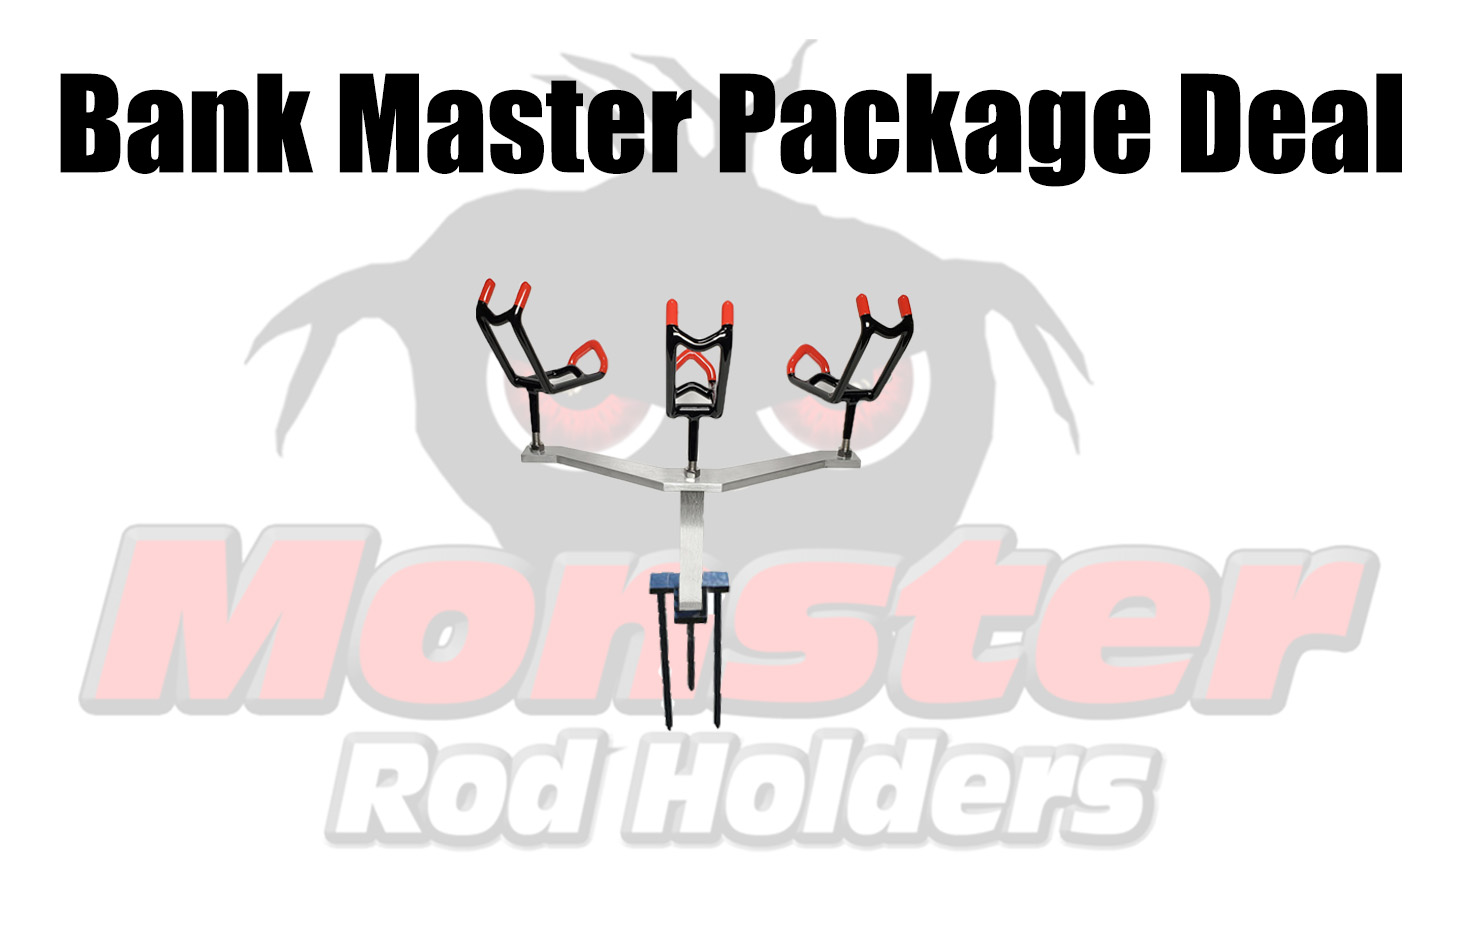 Bank Master Package Deal